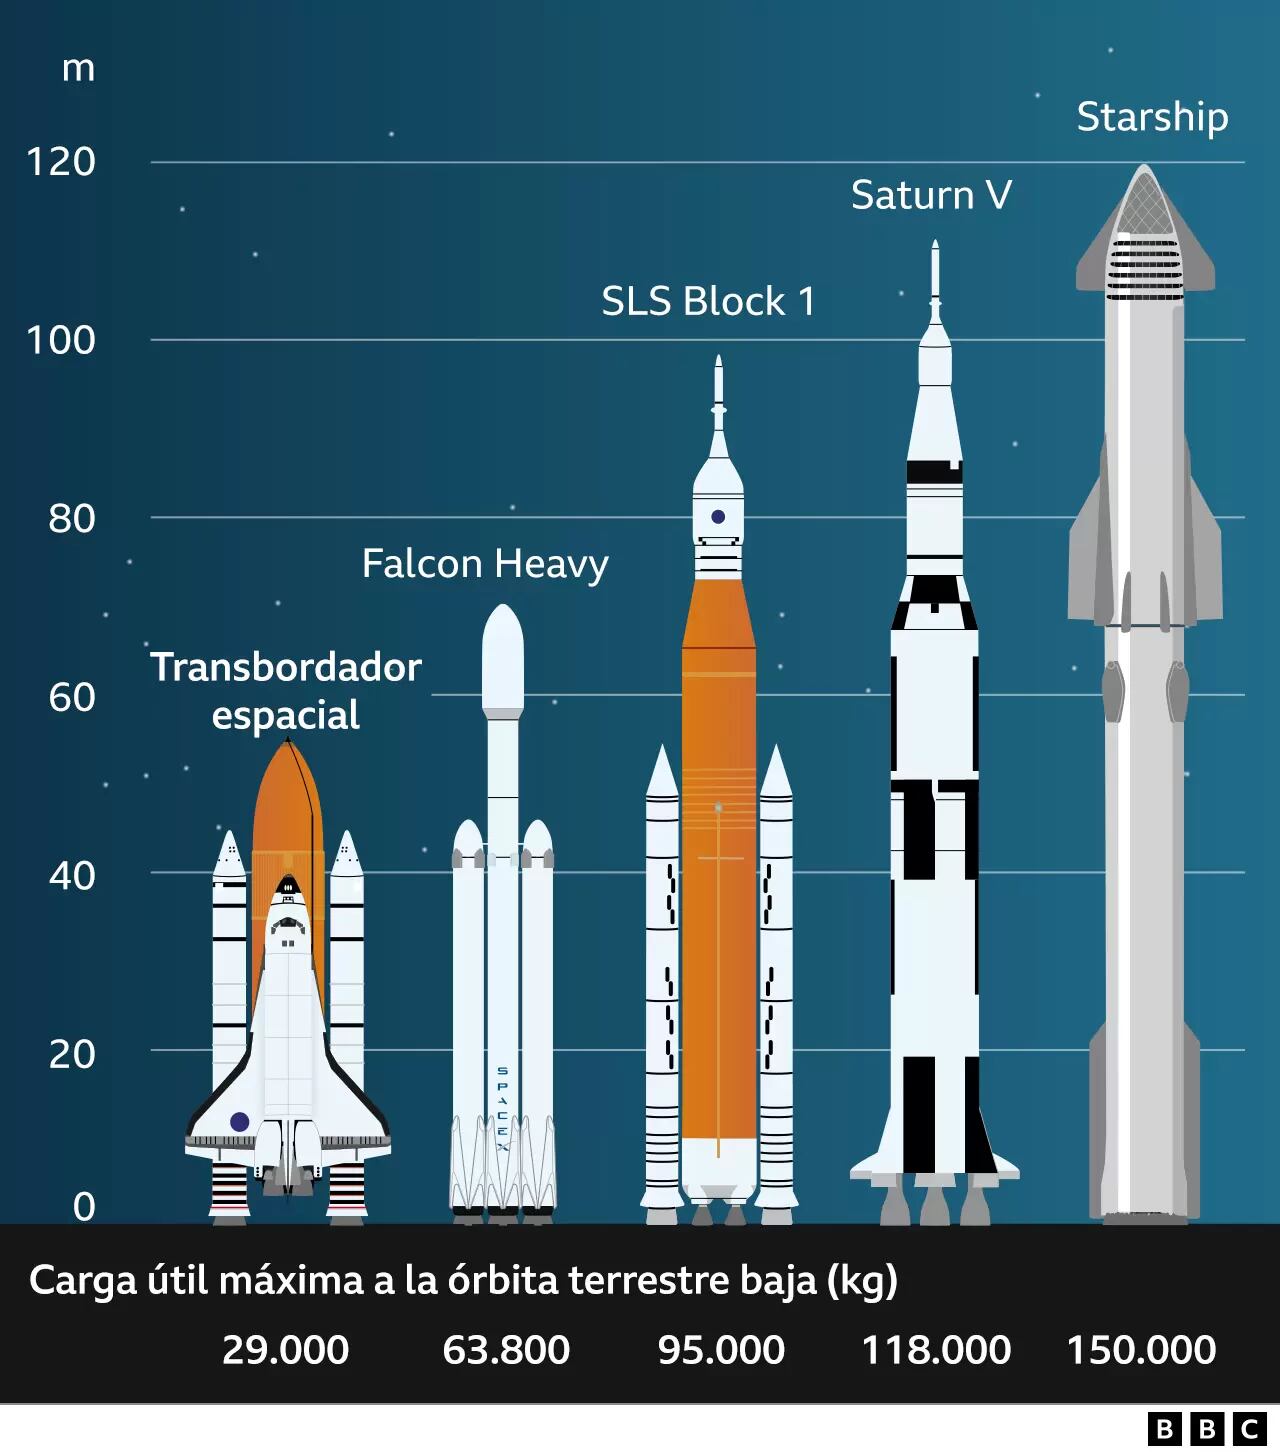 SpaceX's Starship is the largest and most powerful rocket in history.